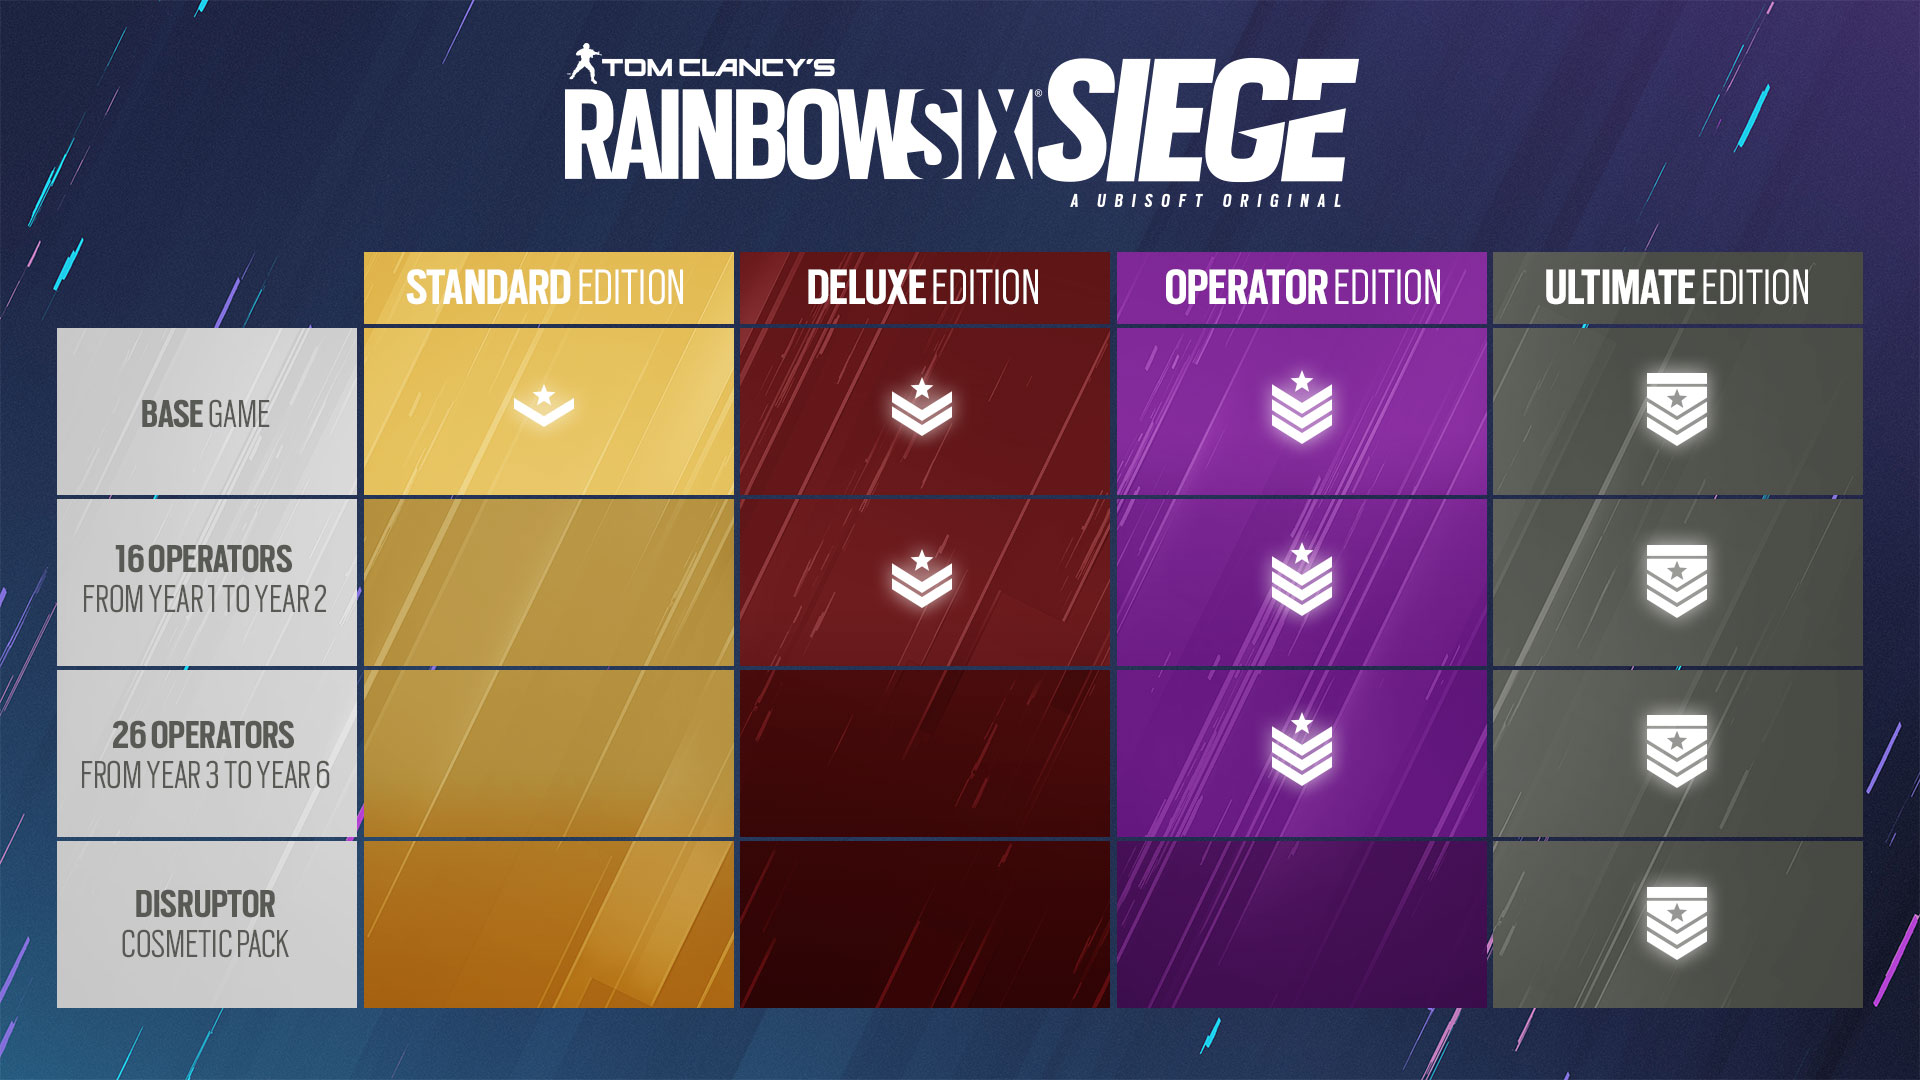 Perle Syd indebære Differences between editions of Rainbow Six Siege | Ubisoft Help